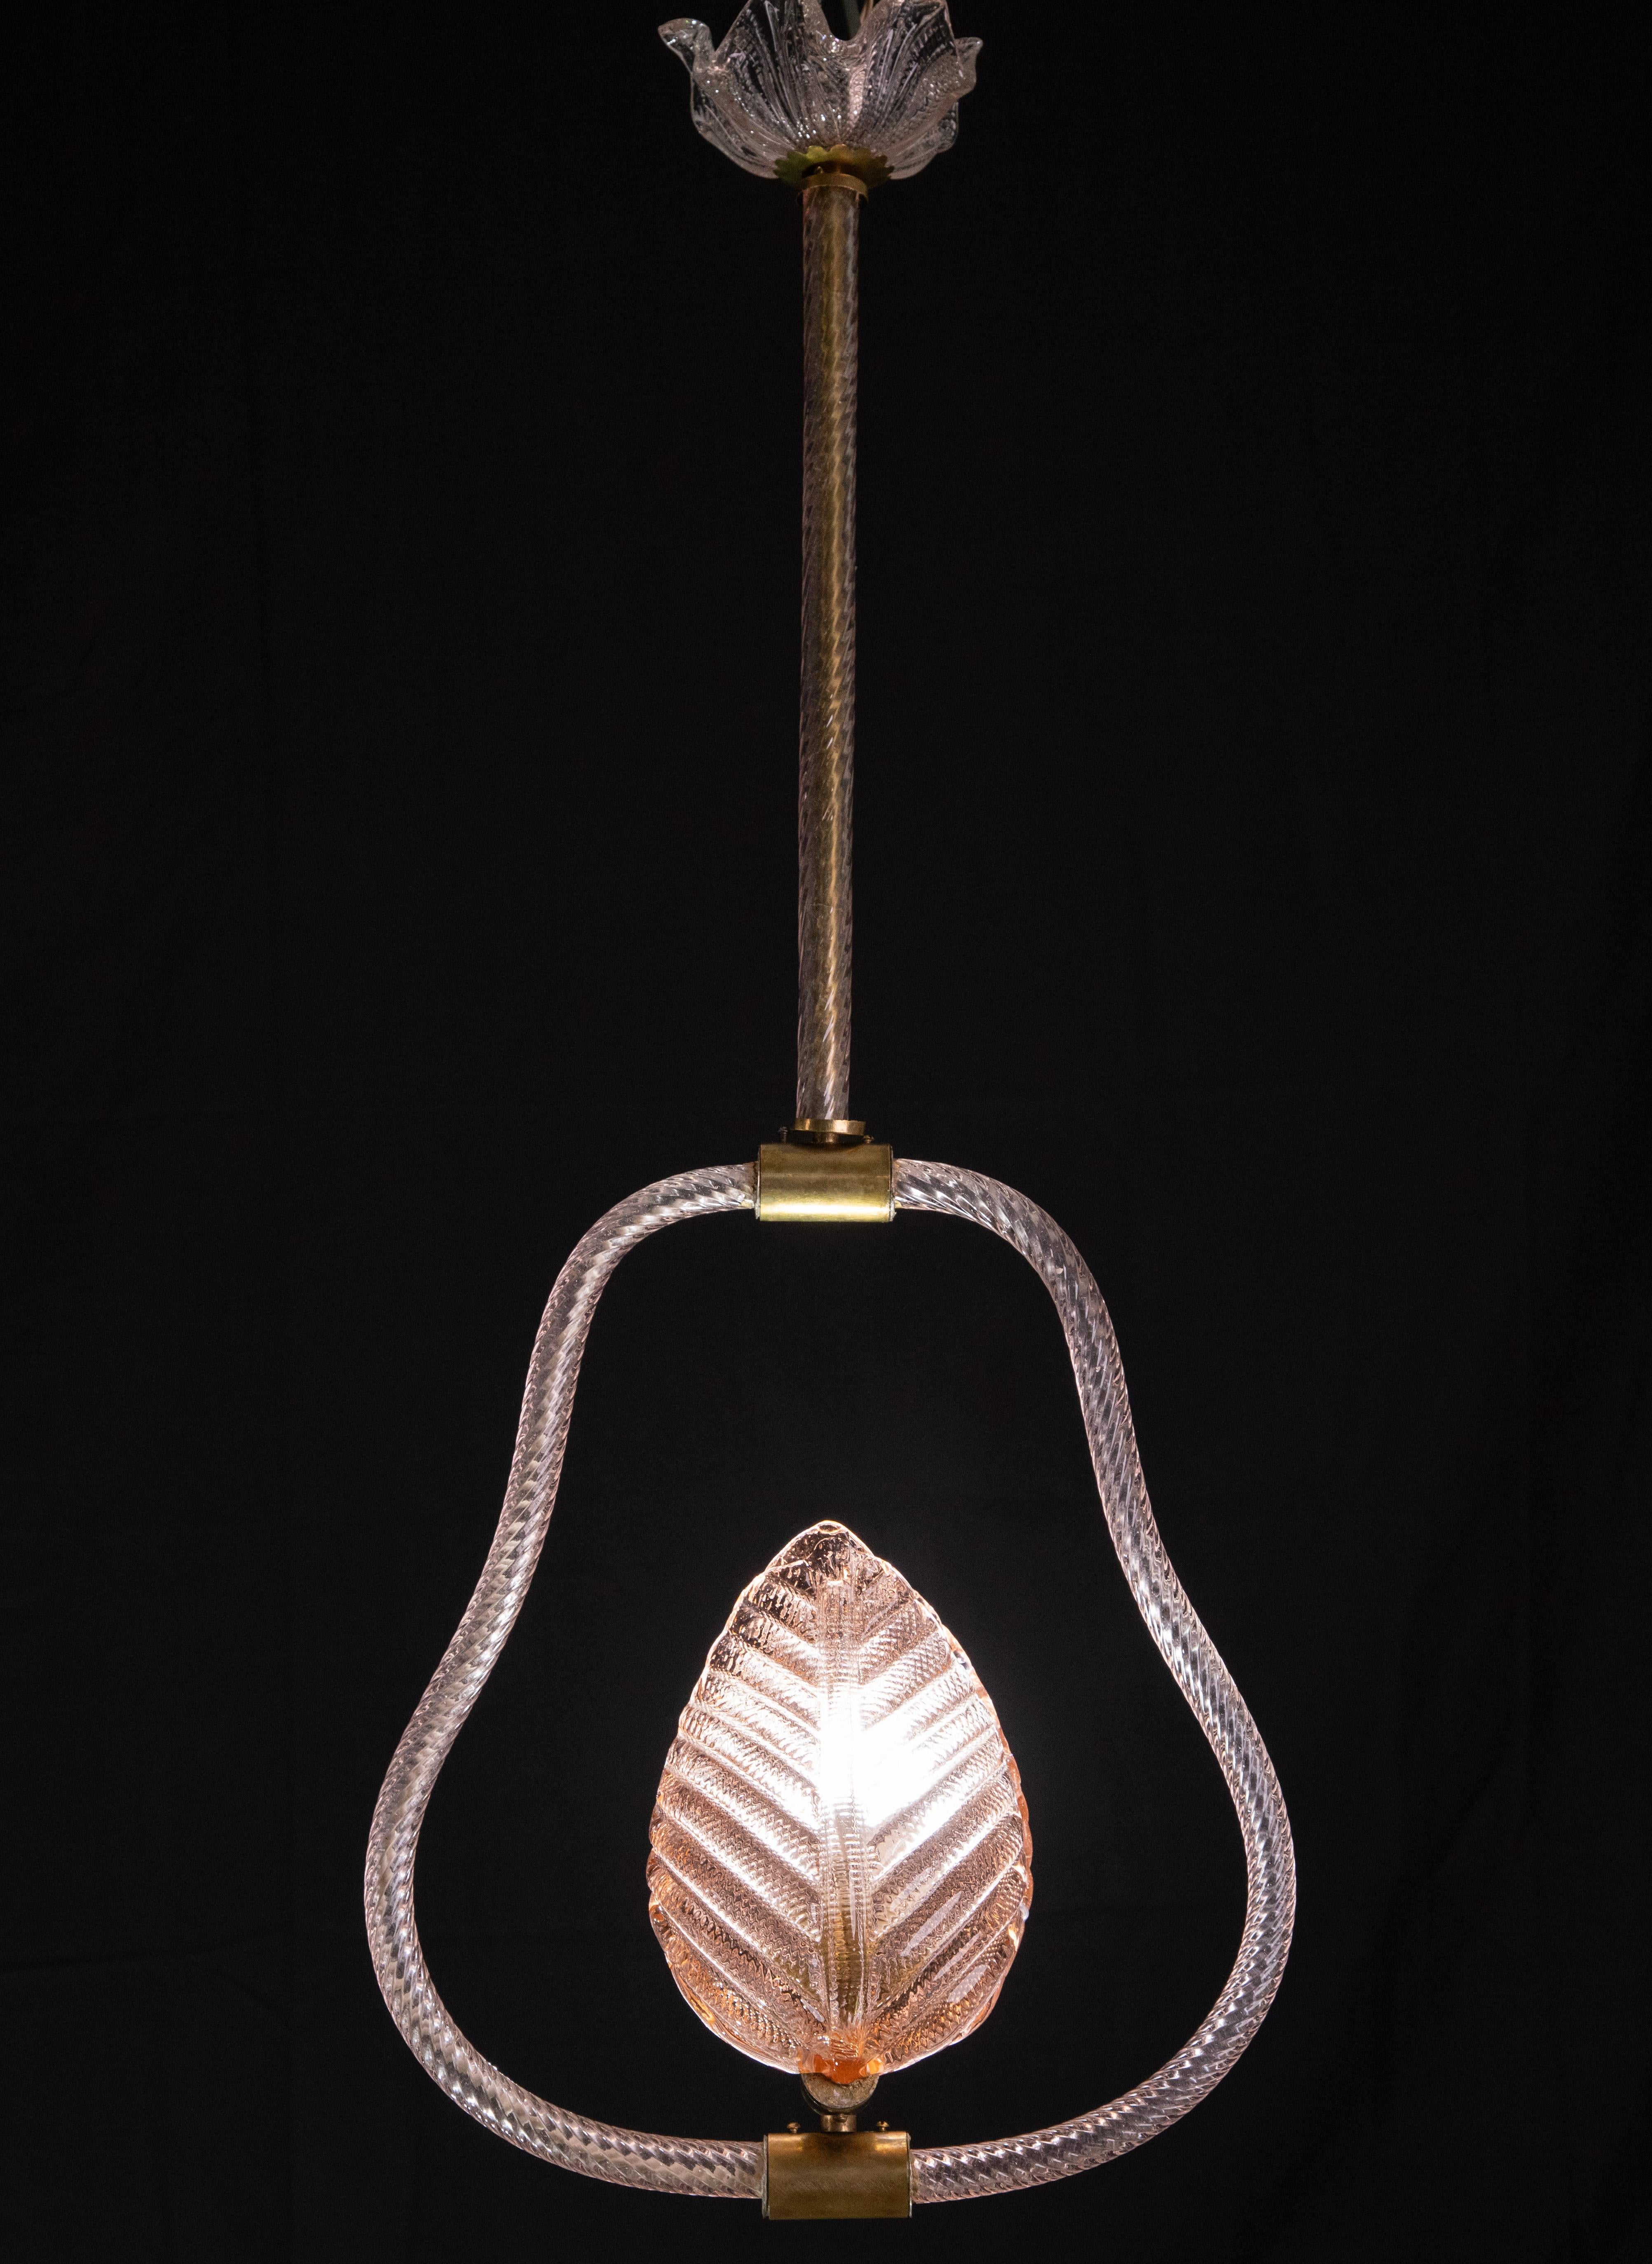 Elegant Rare Pink Murano Glass Chandelier by Barovier & Toso, 1950s For Sale 2